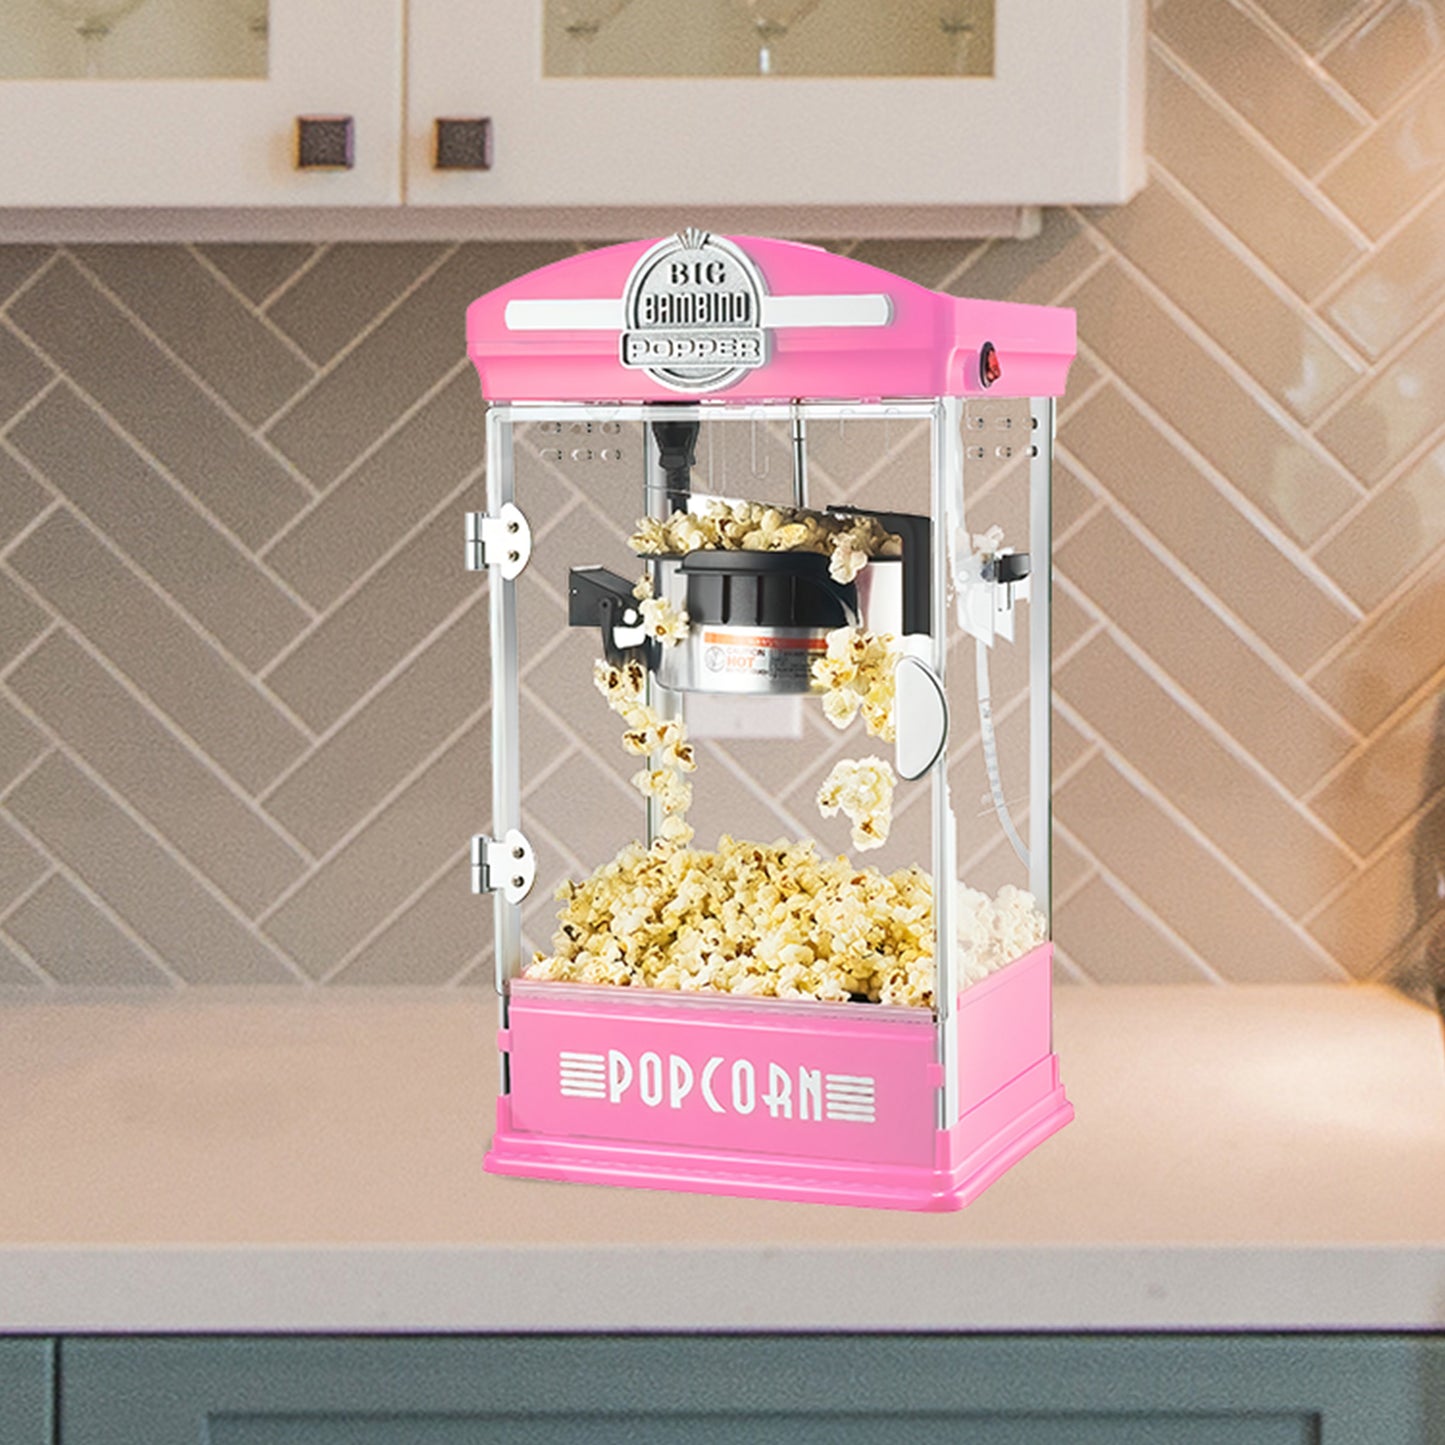 Little Bambino Popcorn Machine with 2.5 Ounce Kettle and 12 Pack of All-In-One Popcorn Kernel Packets - Pink